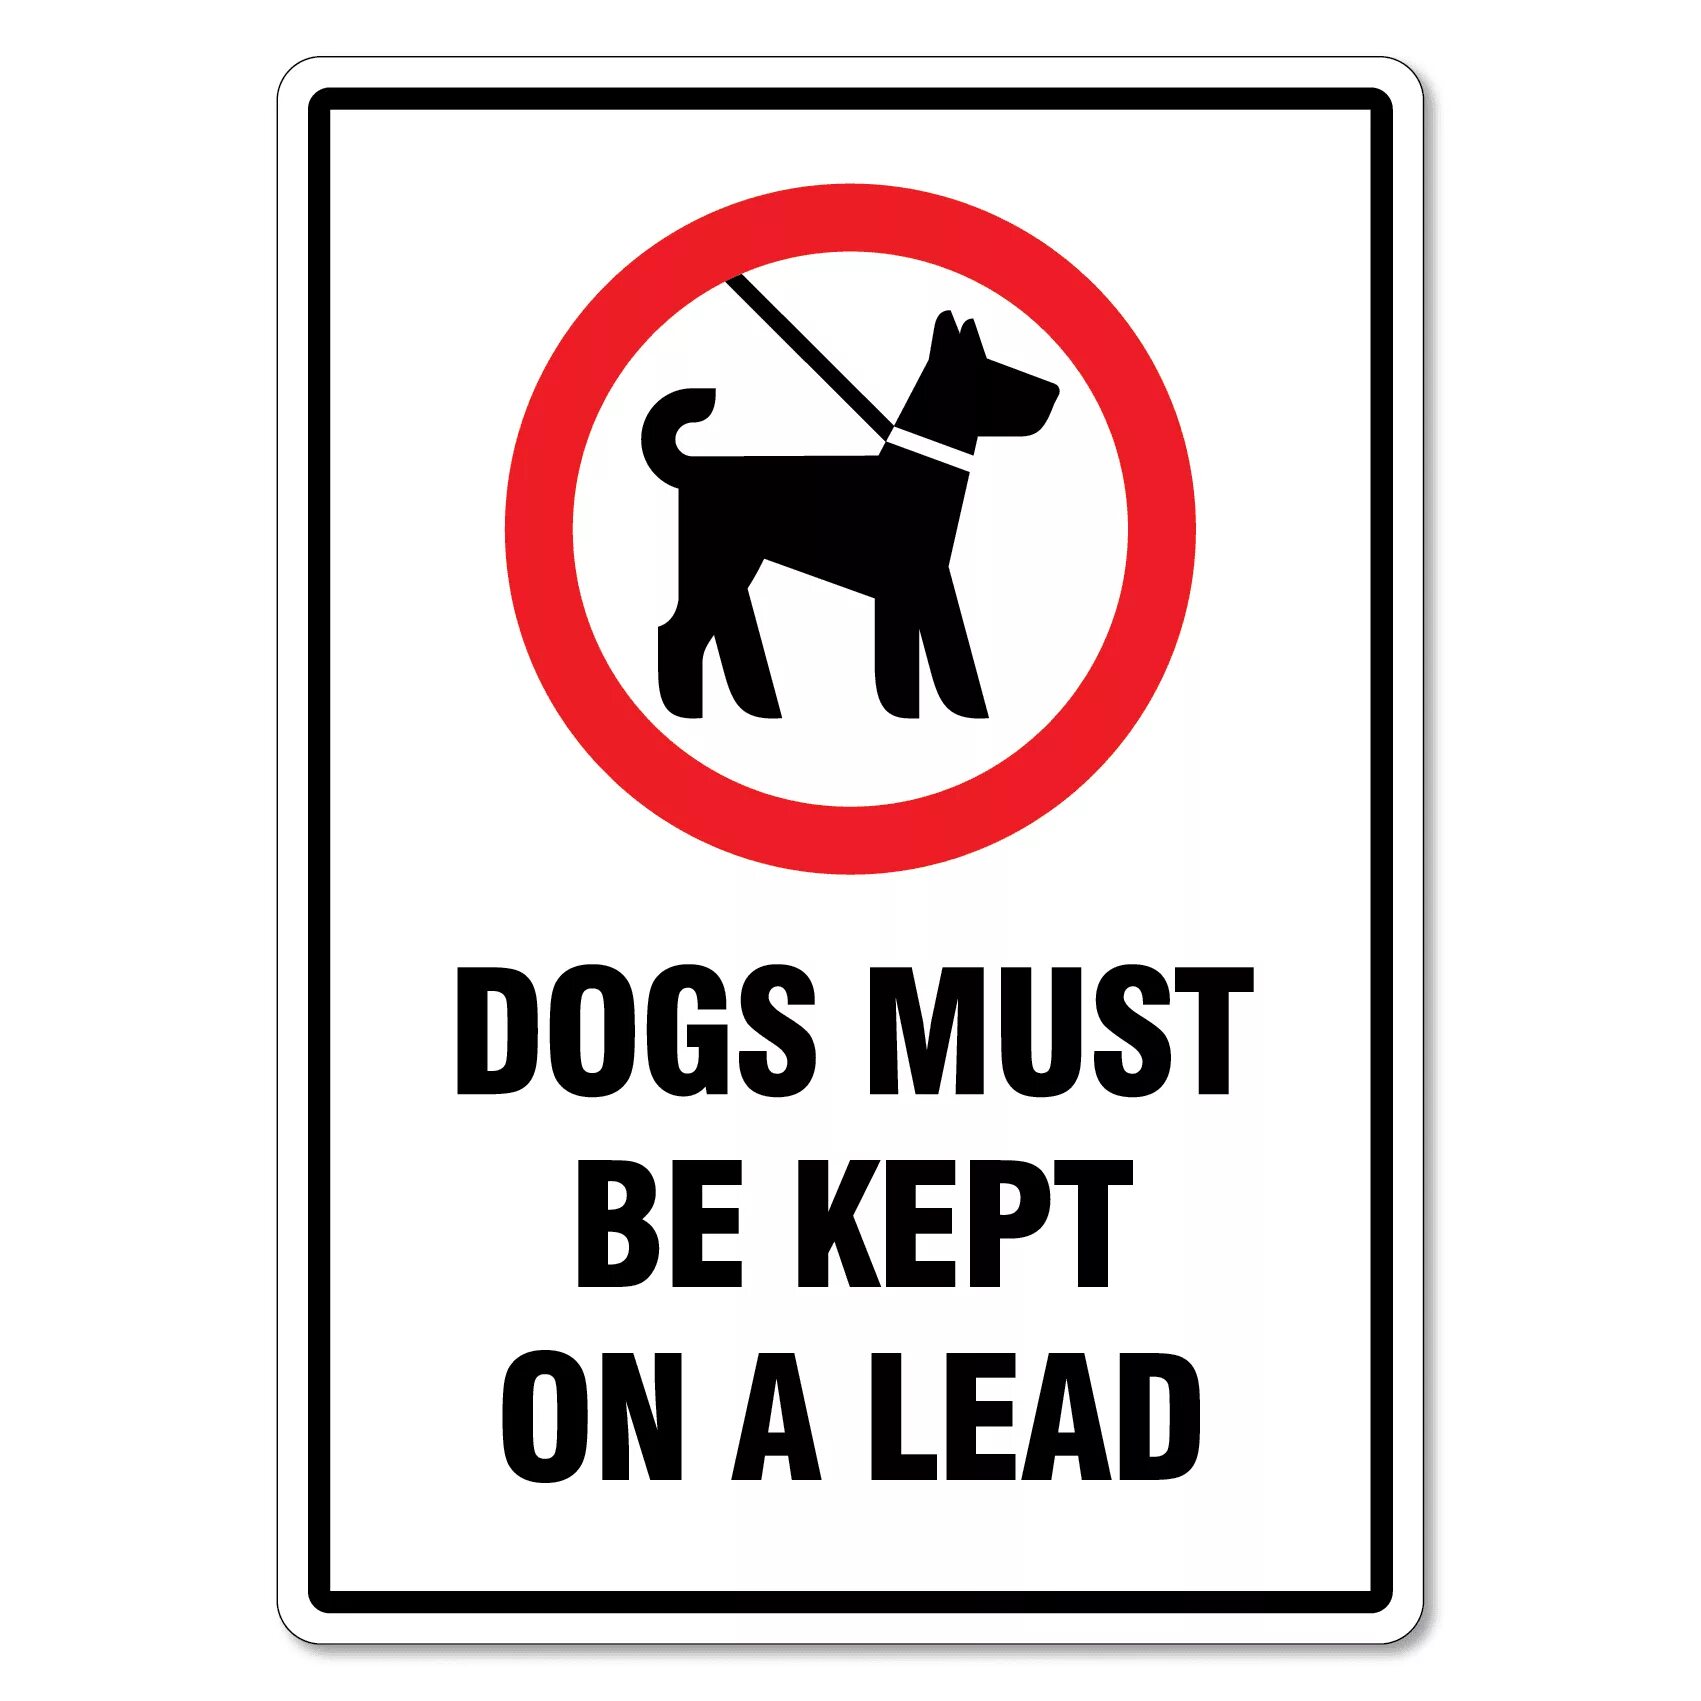 Dogs must keep on a lead